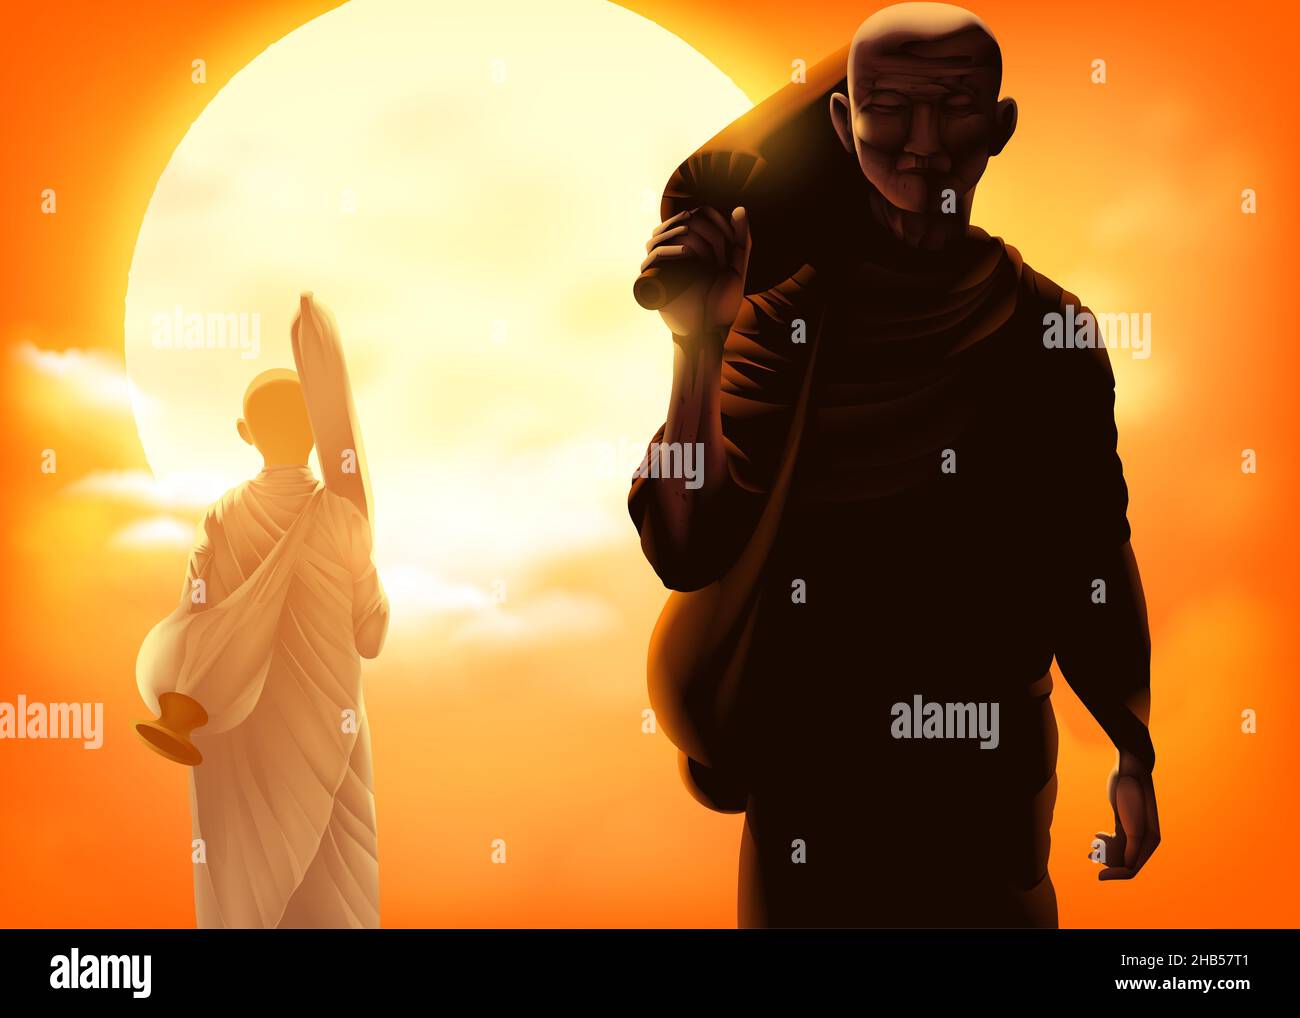 Buddhism vector illustration of a male monk and female monk are walking in an opposite direction, but towards the same destination is Nirvana. Stock Vector